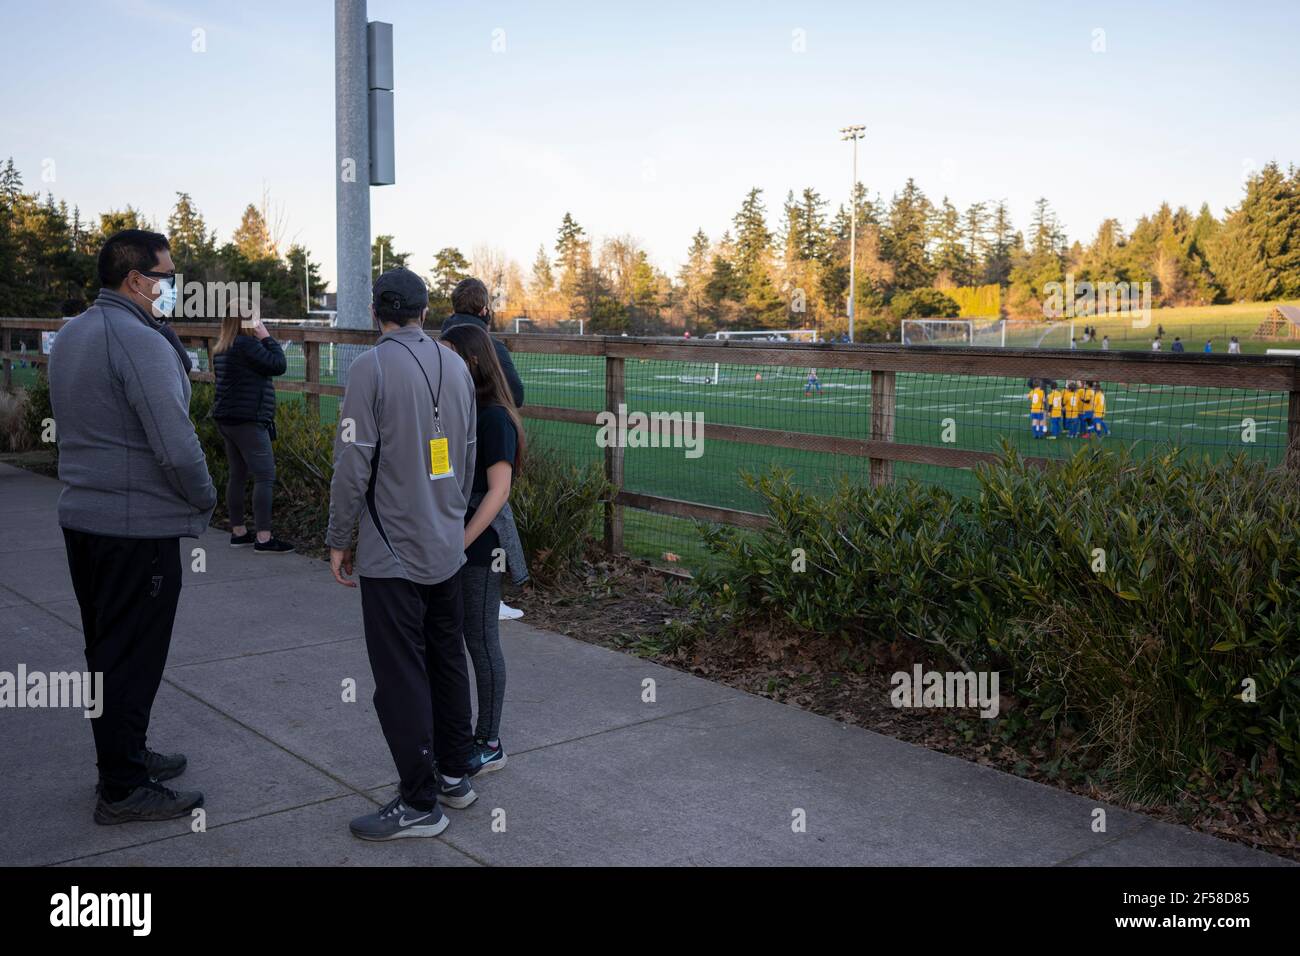 Kids play soccer in a training camp in Lake Oswego, Oregon, on Thursday, March 11, 2021, while masked parents wait outside as spring approaches amid ... Stock Photo